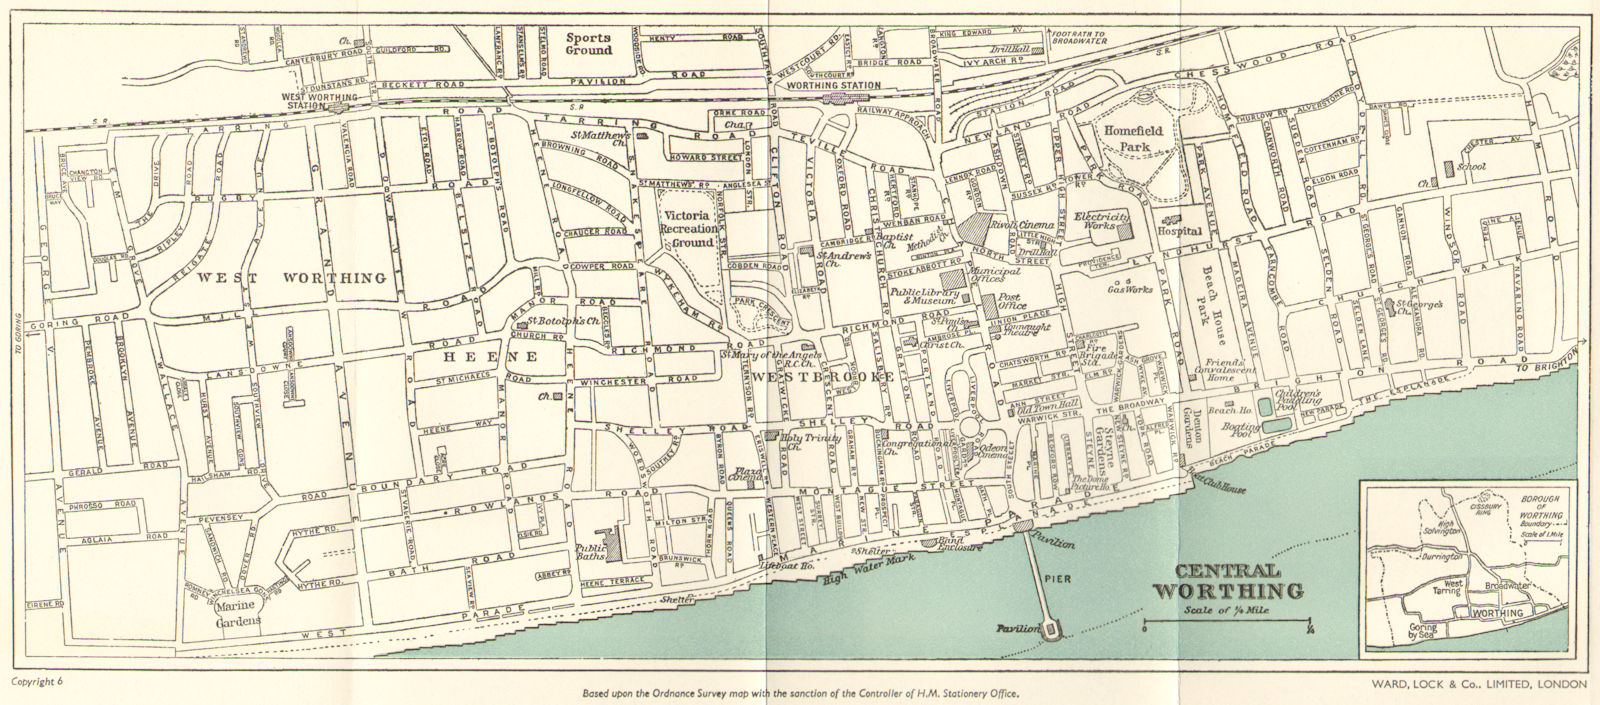 CENTRAL WORTHING vintage town/city plan. Sussex. WARD LOCK c1963 old map